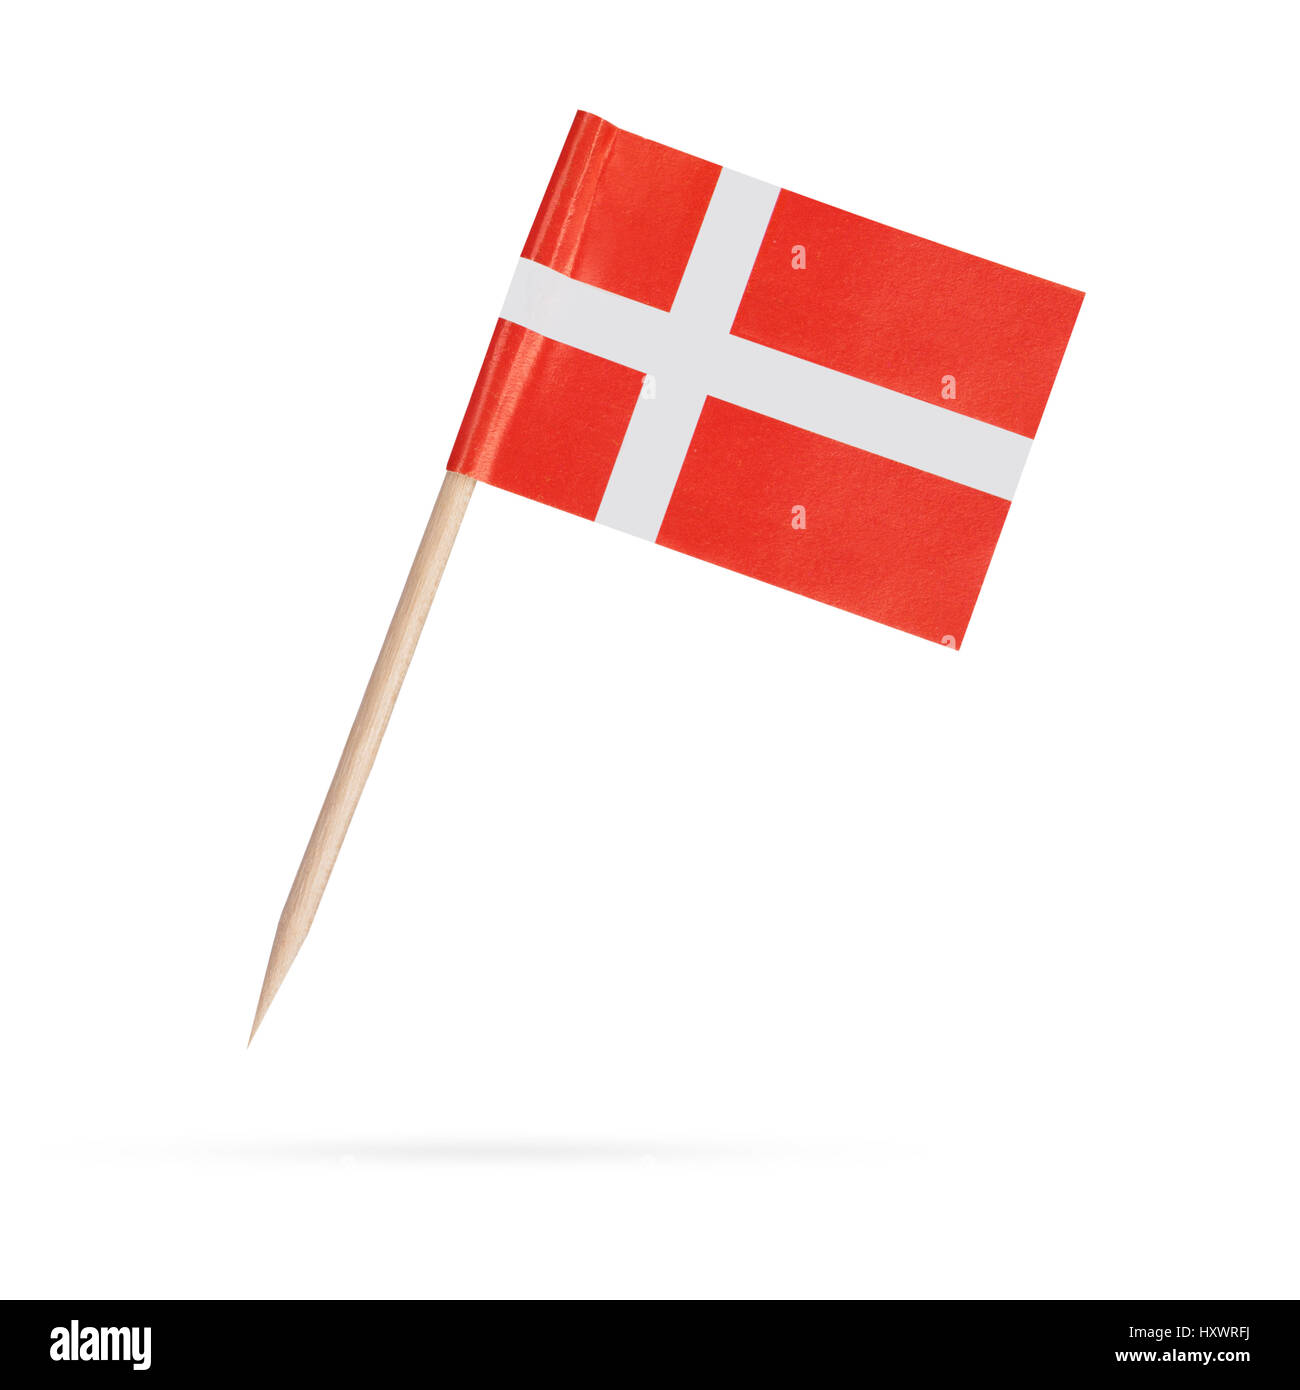 Miniature paper flag Denmark. Isolated on white background.With shadow below Stock Photo